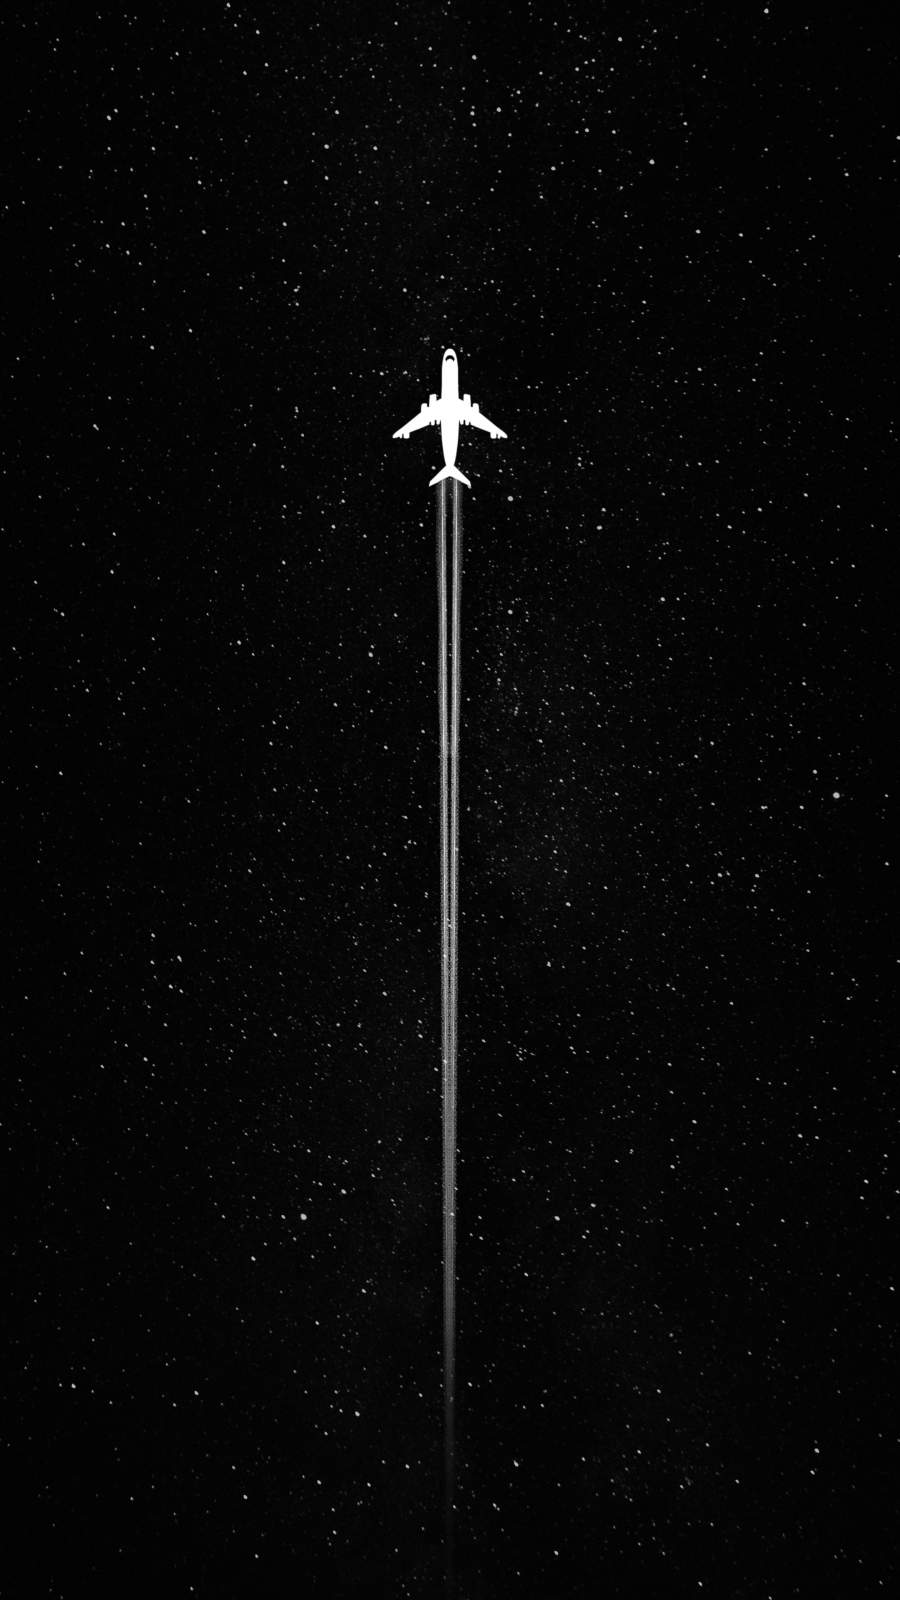 100+] Airplane Iphone Wallpapers | Wallpapers.com